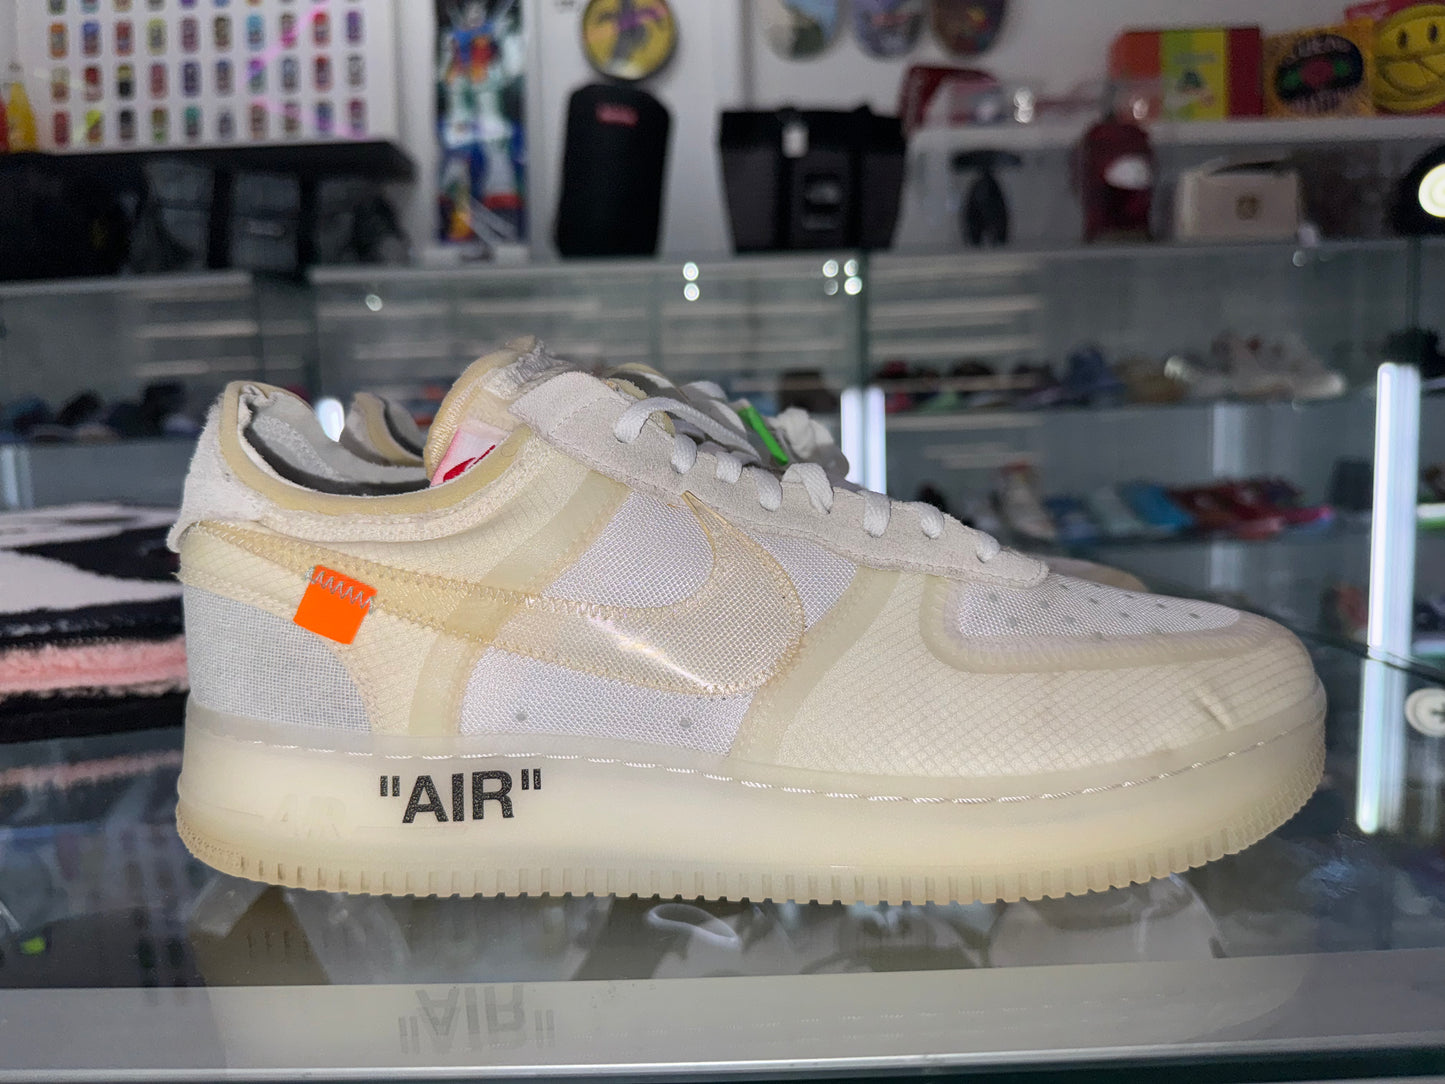 Off White x Nike Air Force 1 Low The Ten Size 11.5 us Virgil Abloh